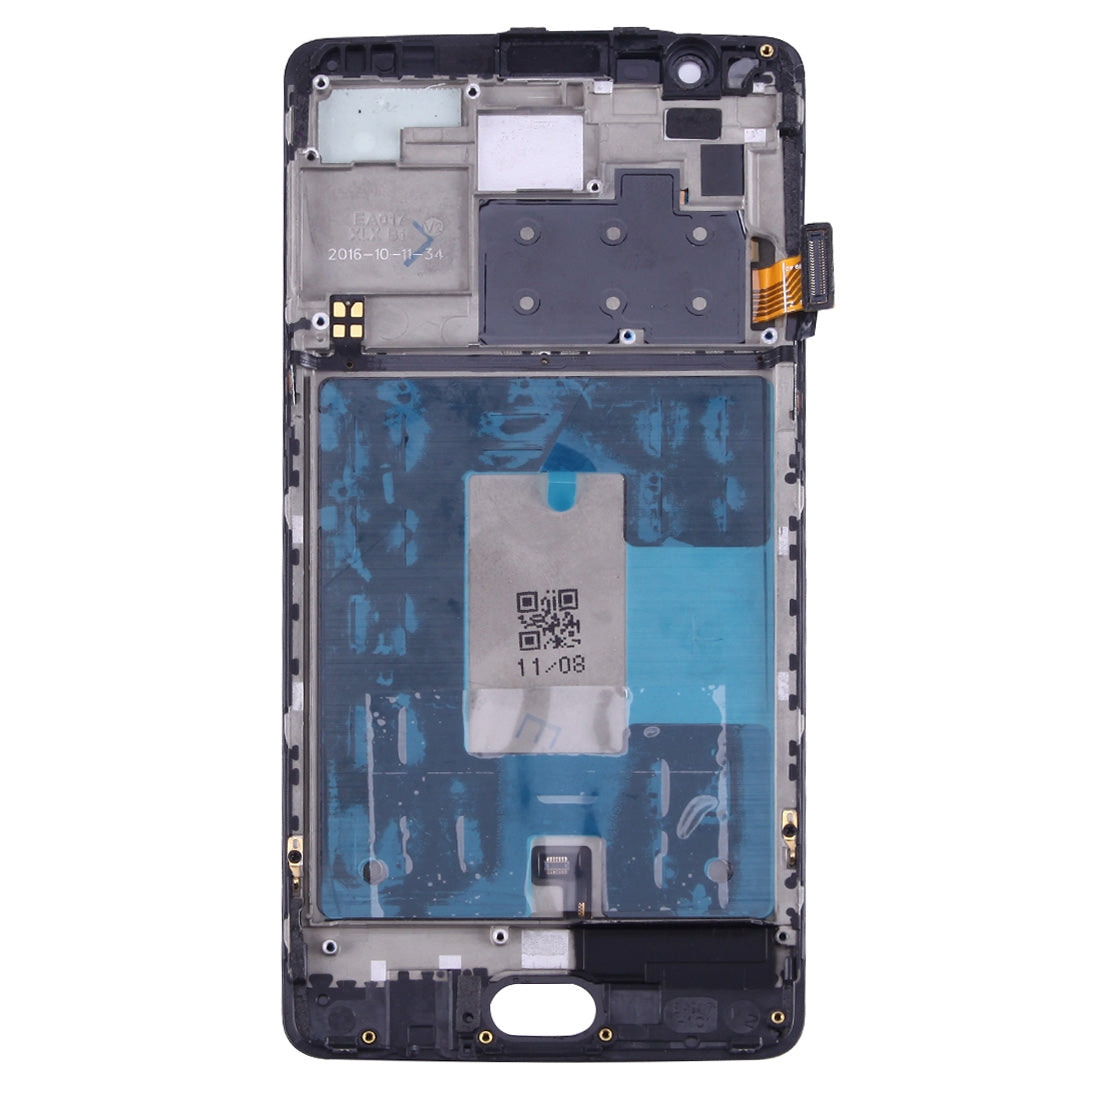 Pantalla Completa LCD + Tactil + Marco OnePlus 3 A3003 Negro